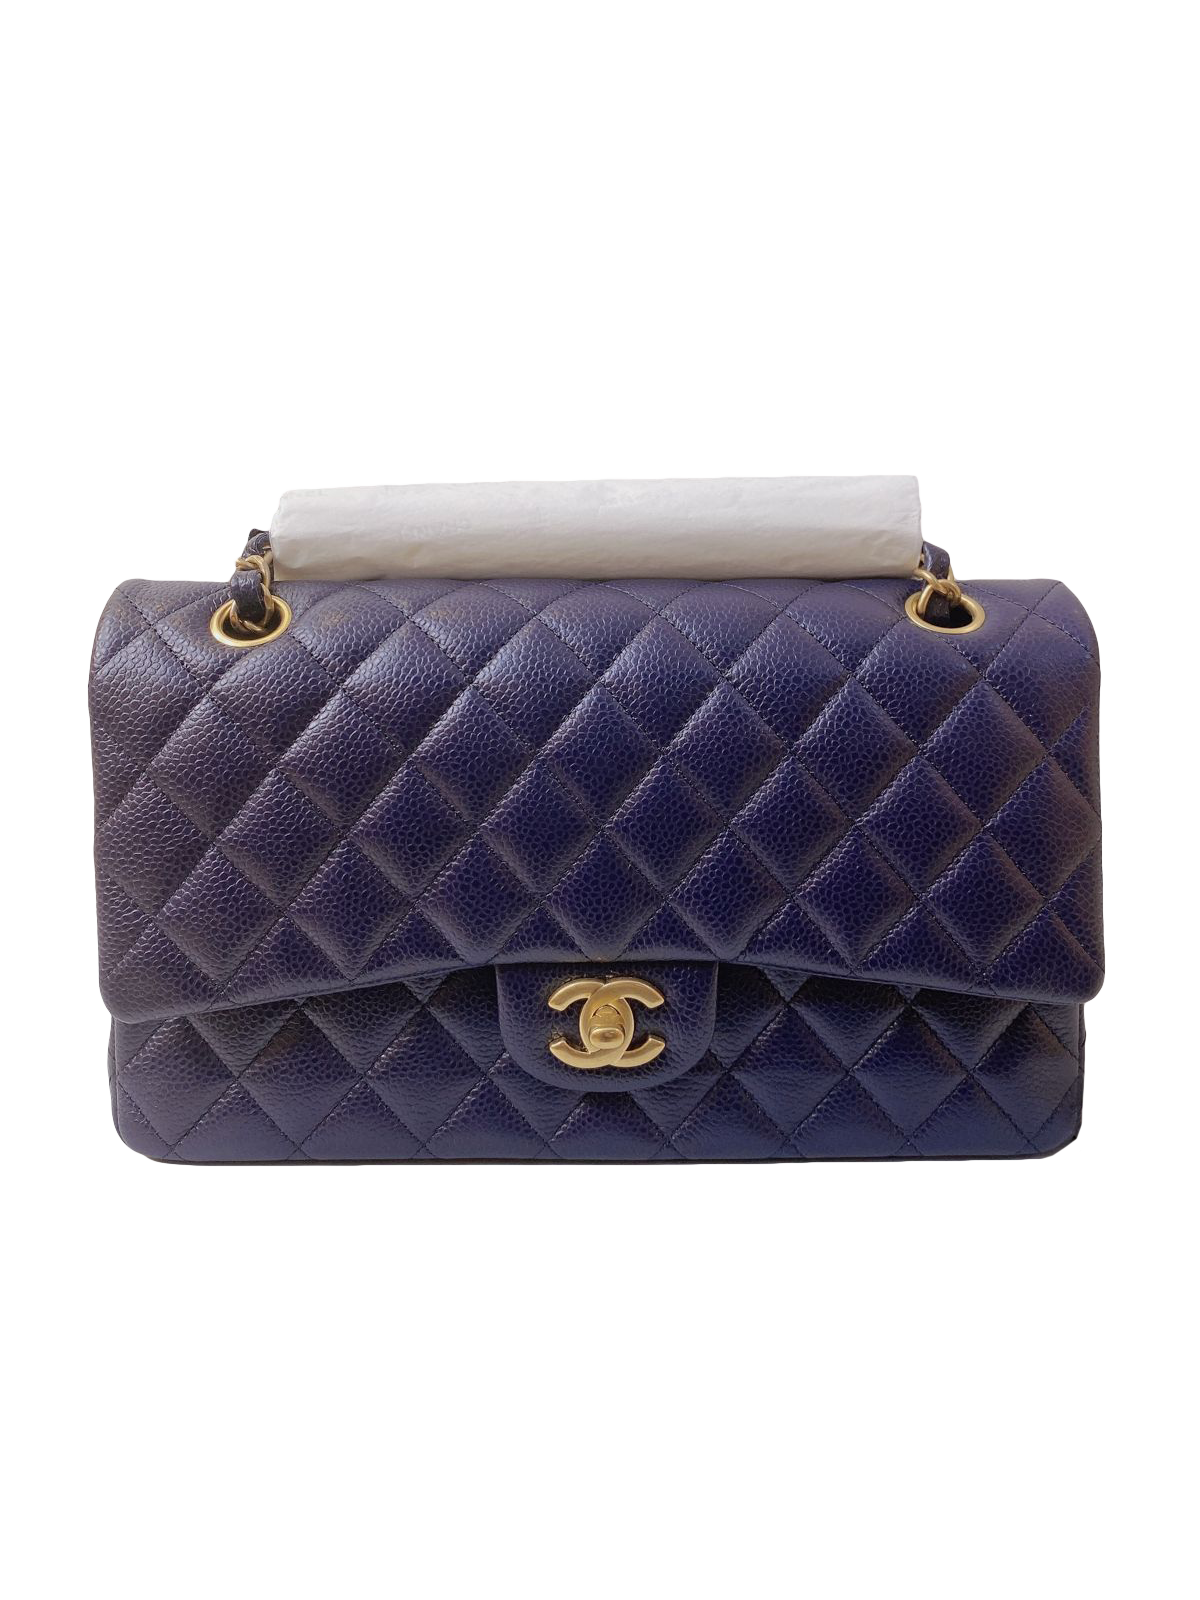 CHANEL NAVY BLUE CAVIAR QUILTED LEATHER CLASSIC MEDIUM DOUBLE FLAP